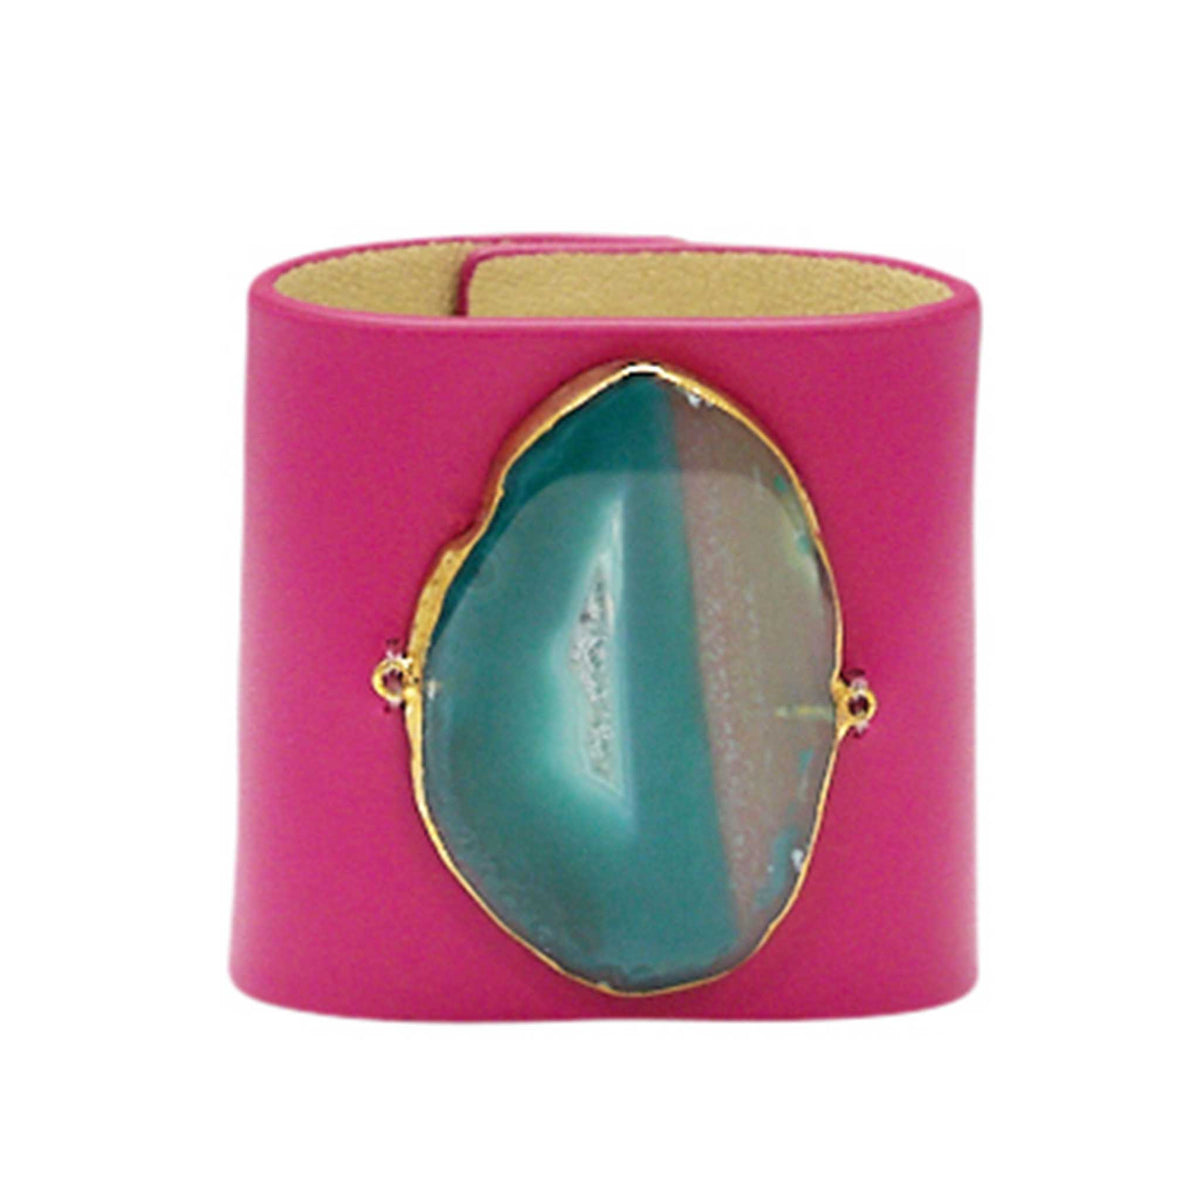 LOVED CUFF - PINK RUBY LEATHER WITH GREEN AGATE – S.1.01.001.2010